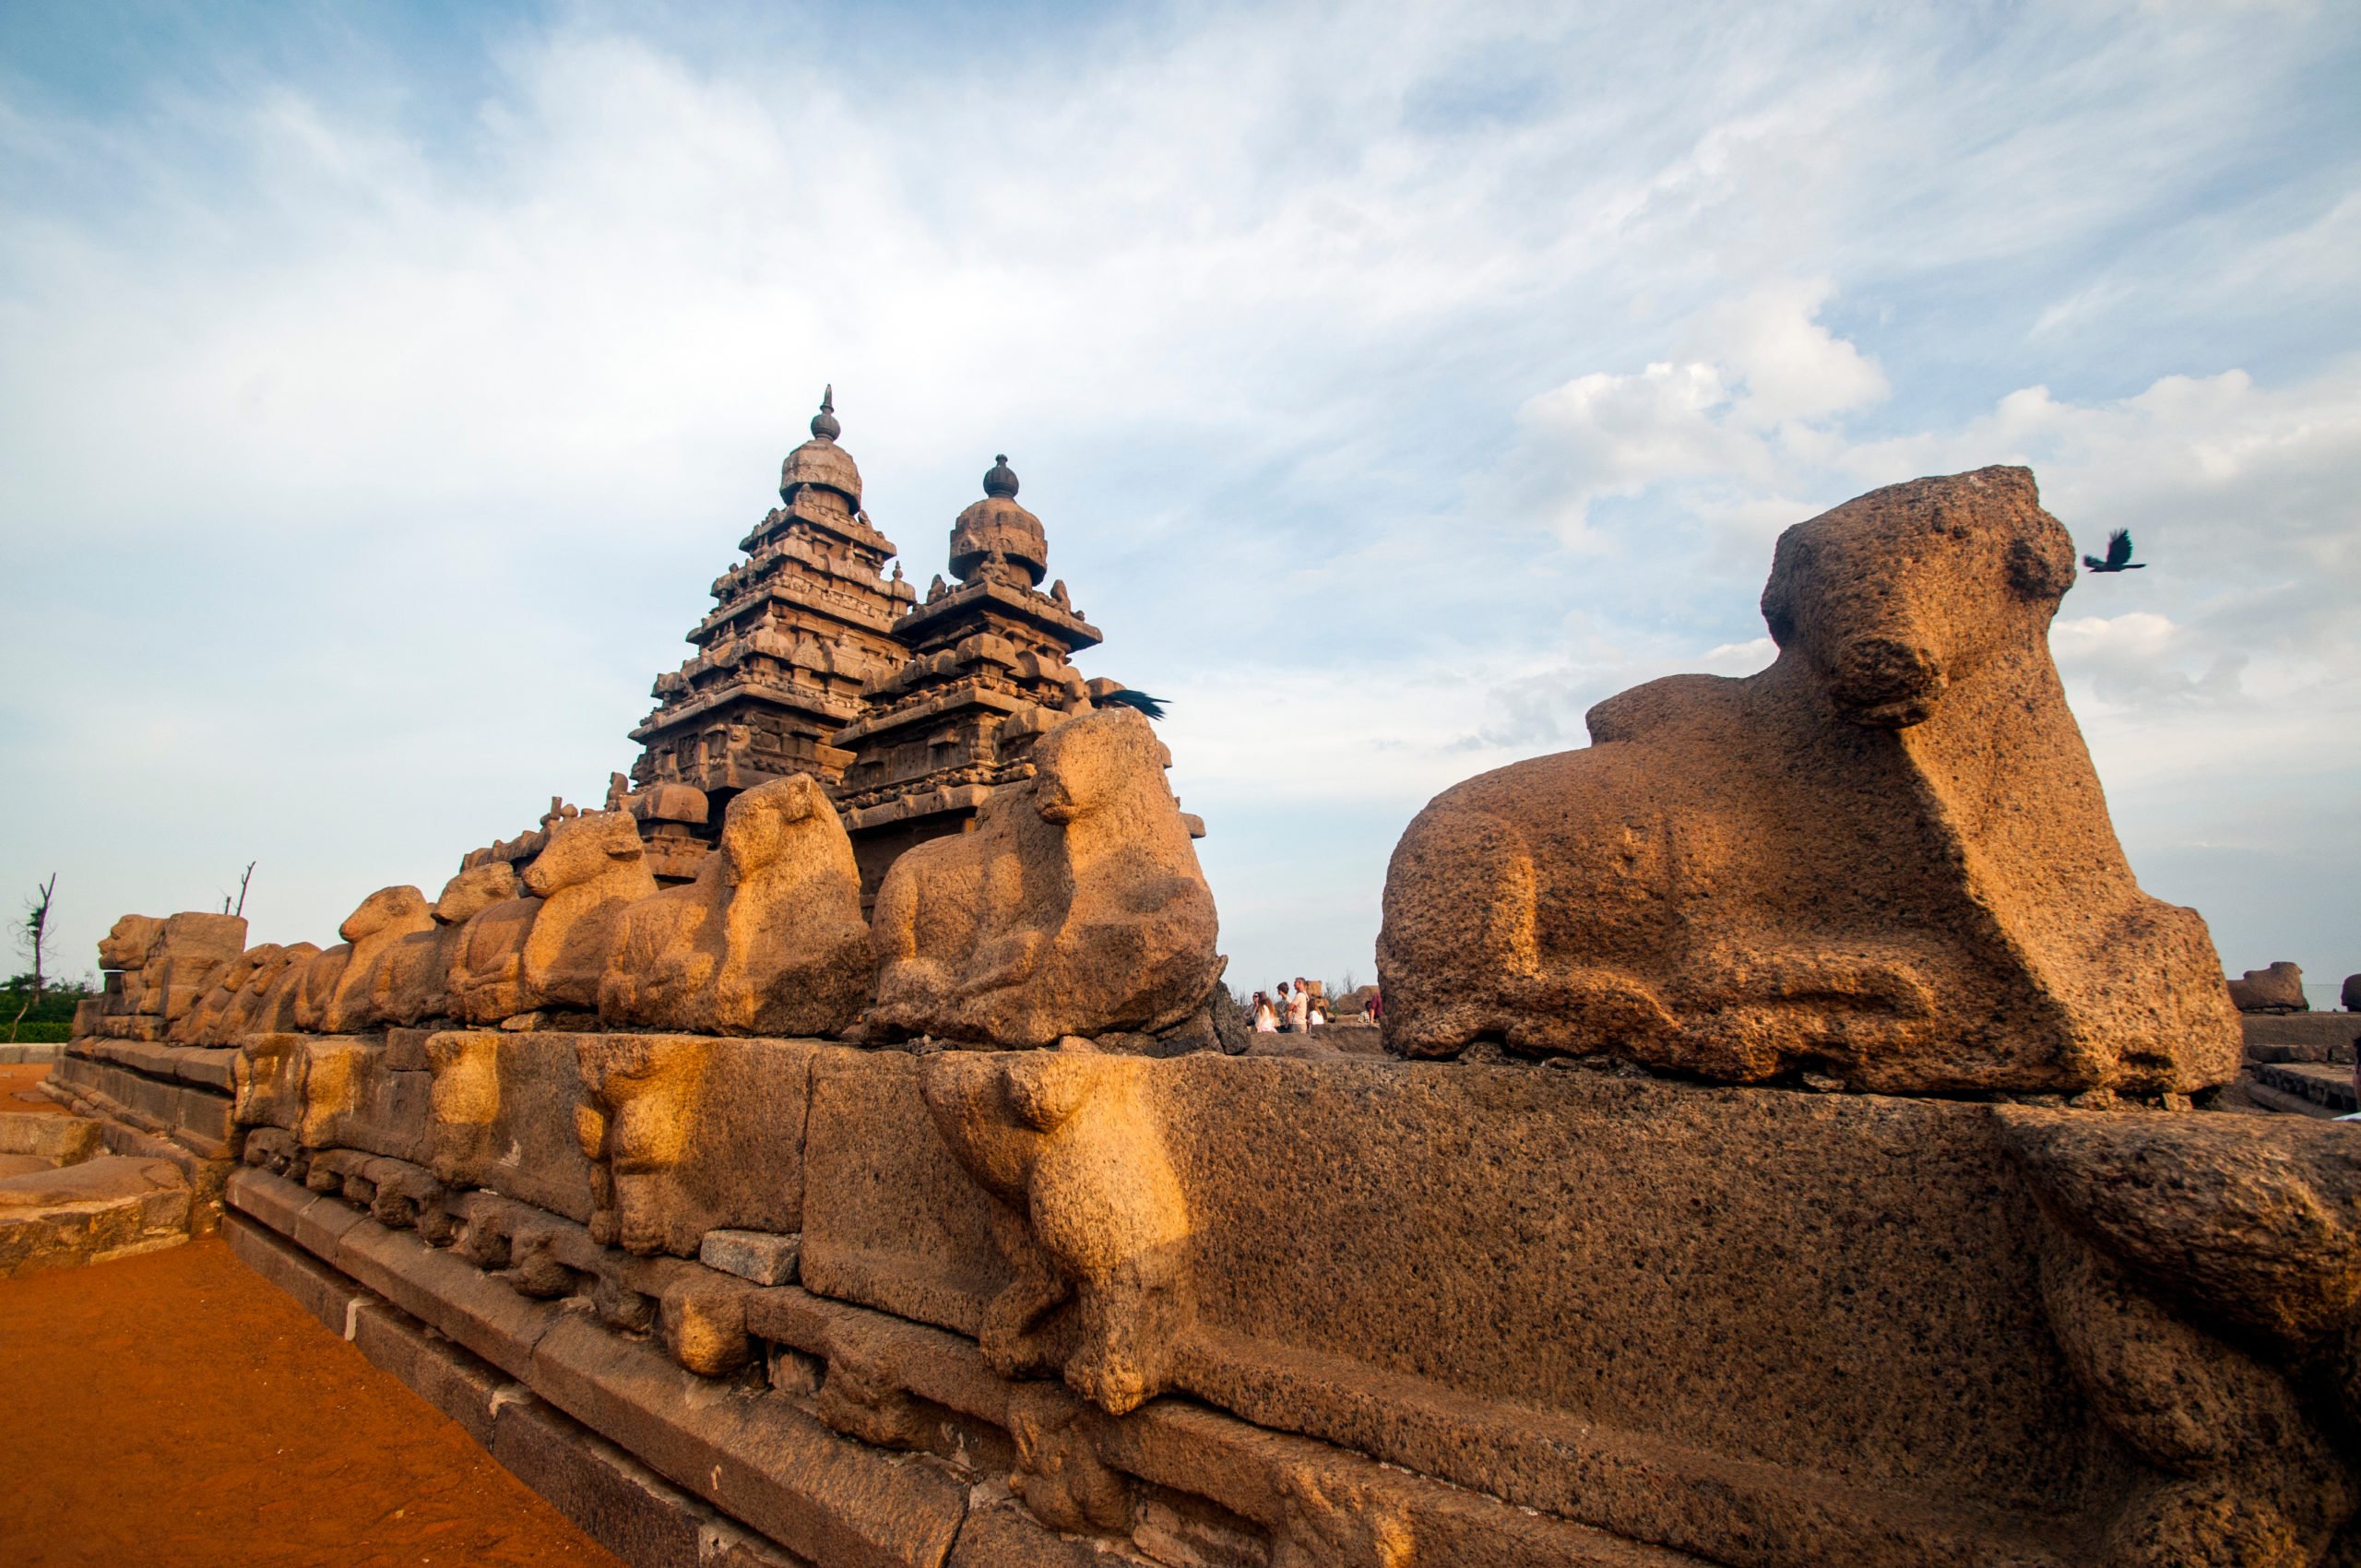 Observe The Magnificent Shore Temple, Which Was One Of The 7 Pagodas As Mentioned By Marco Polo During His Visit In The 11th Century. In Our World Heritage Site Of Mahabalipuram